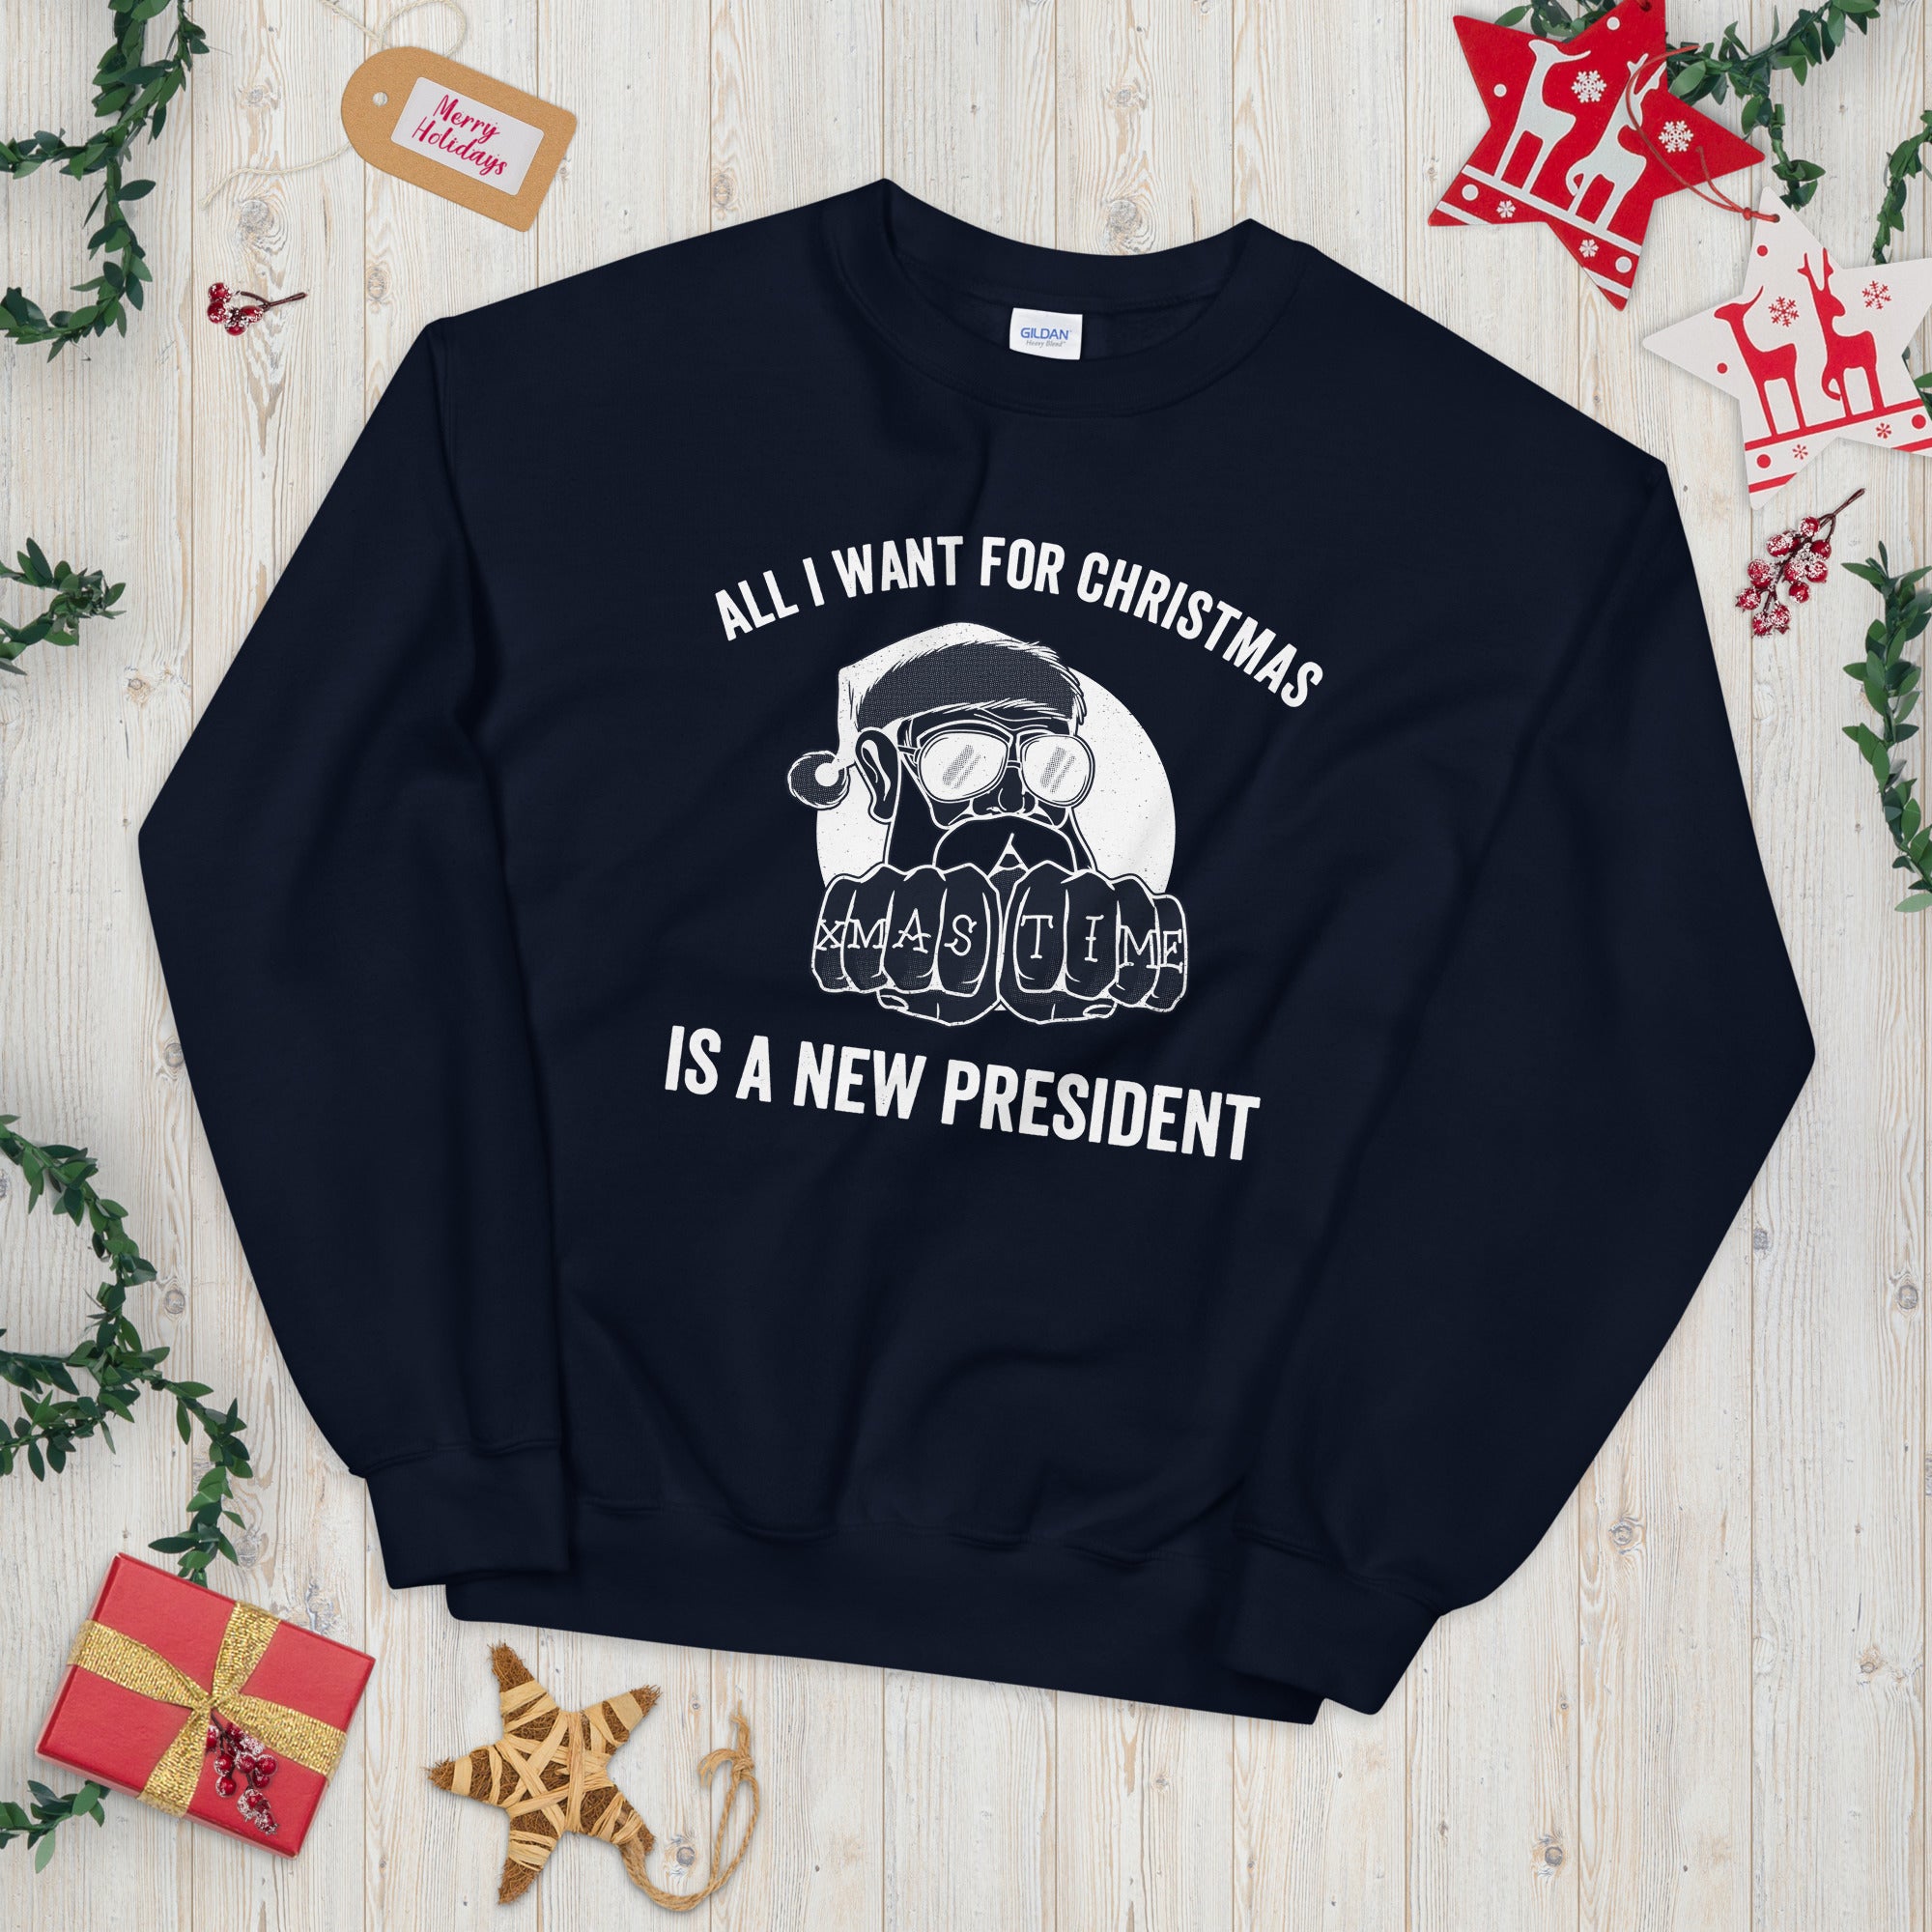 All I Want For Christmas Is A New President Unisex Sweatshirt, Republican Sweater, Republican Gifts, Patriot Shirt, Christmas Biden Sweater - Madeinsea©